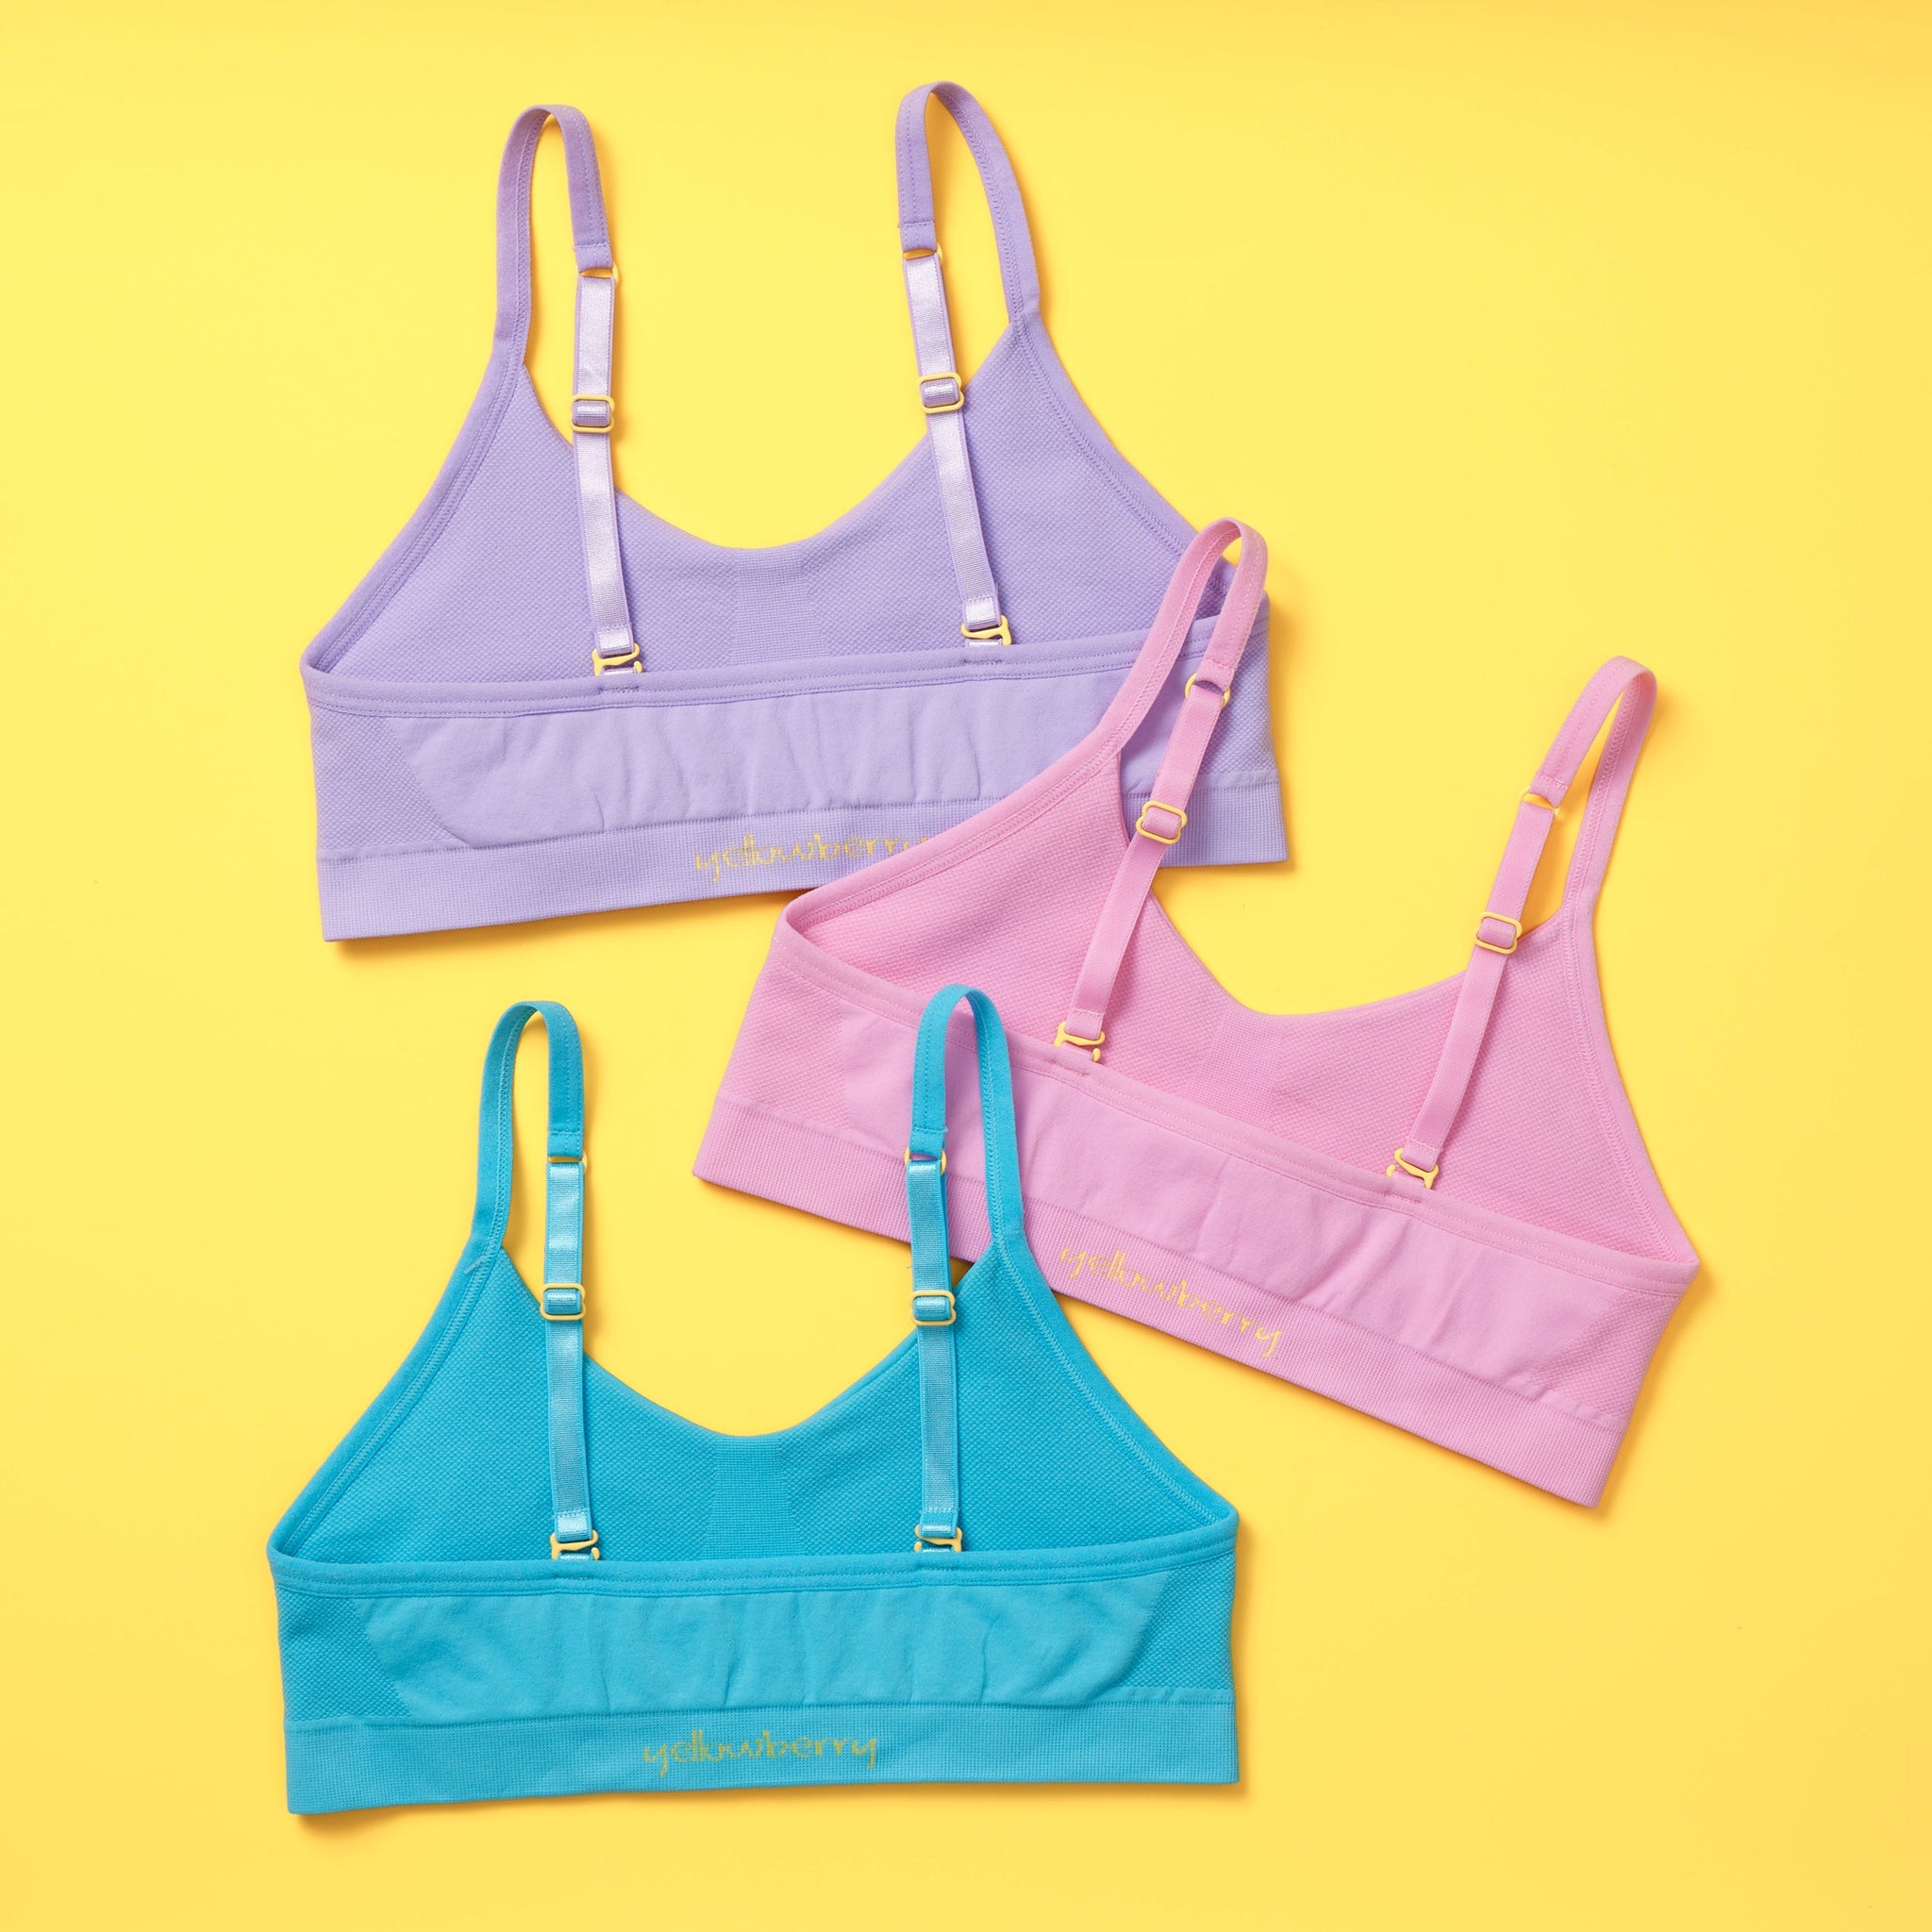 Yellowberry Girls' 3pk Best Cotton Starter Bras With Convertible Straps :  Target